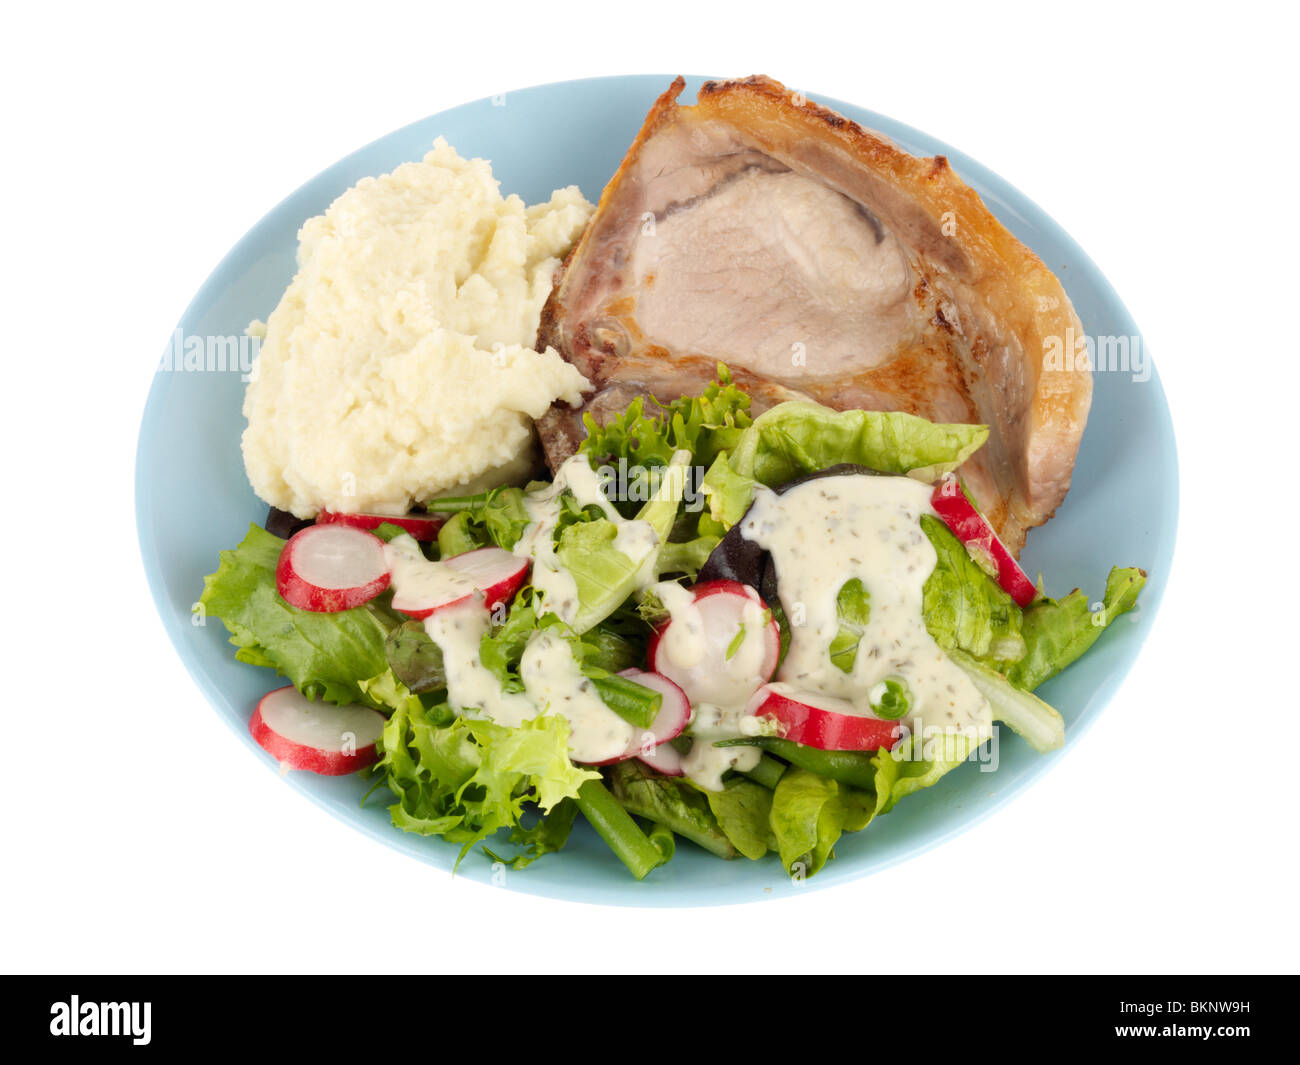 Grilled Pork Chop with Mashed Cauliflower and Salad Stock Photo